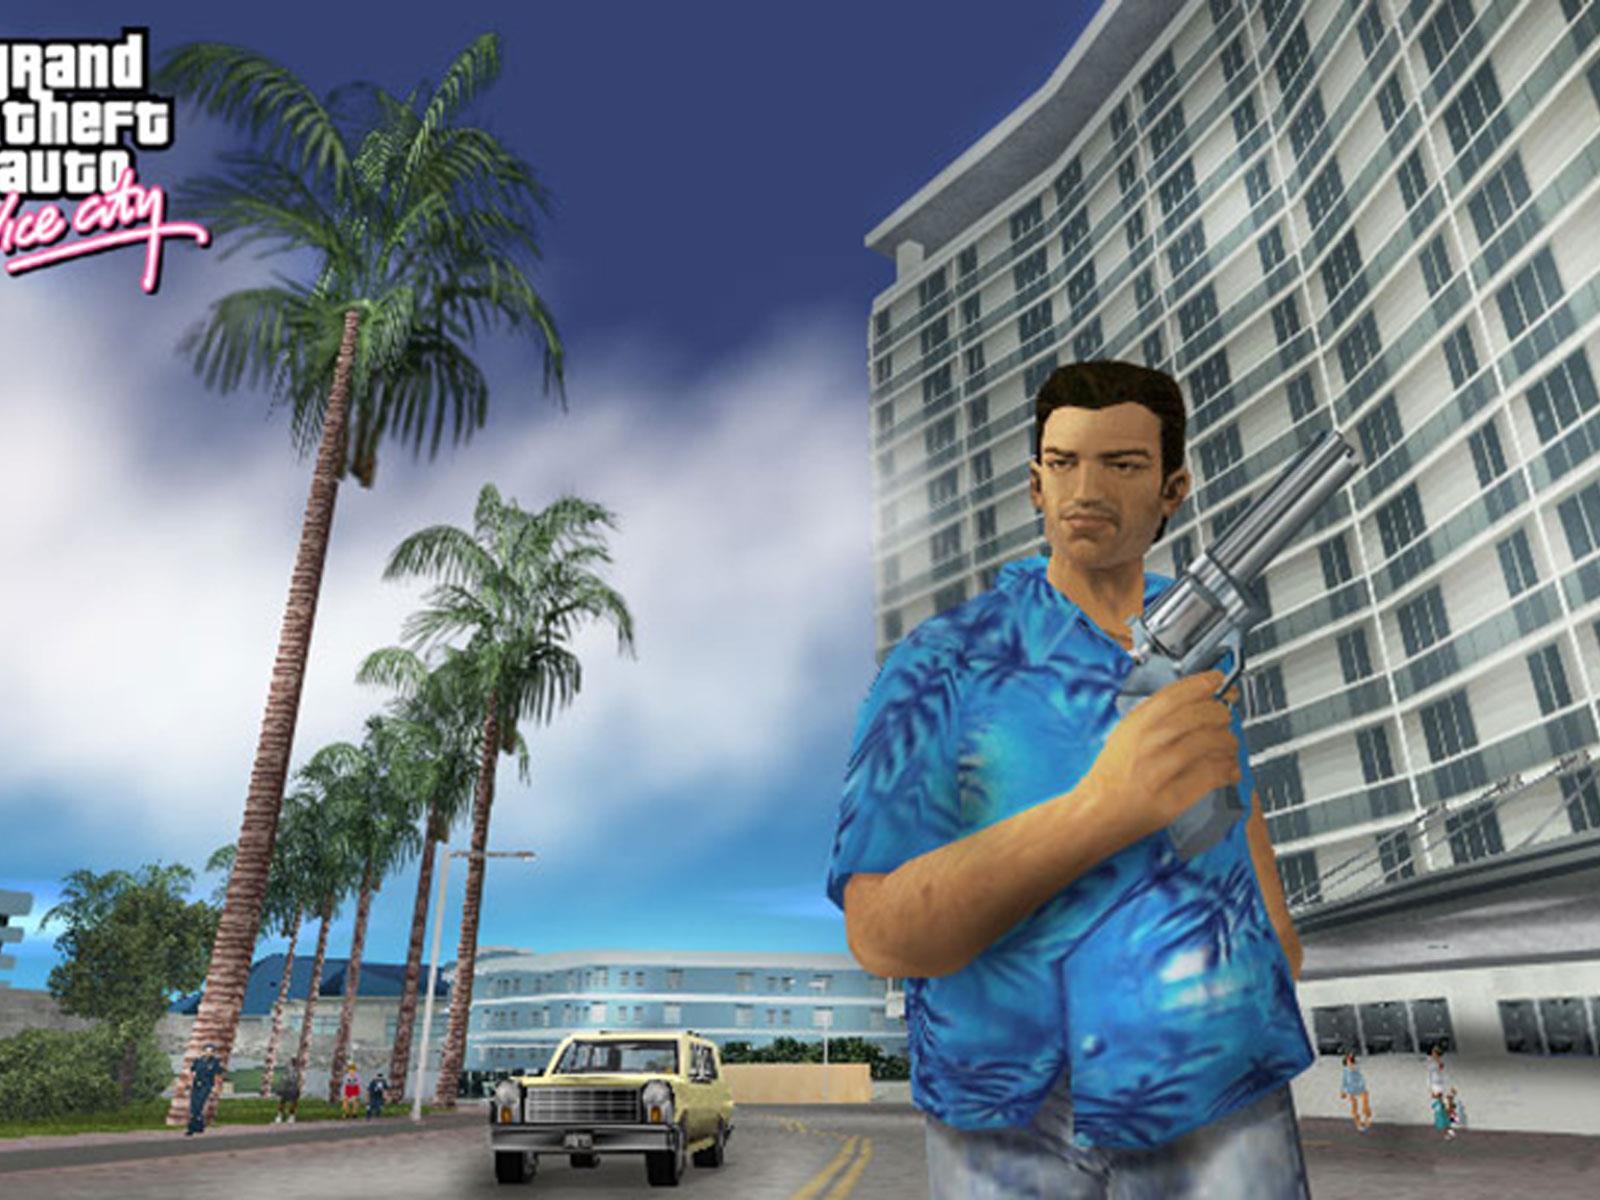 GTA 6 Vice City leaks seemingly confirmed by Rockstar: Everything known  about official teasers so far - Blakecrypto - Medium